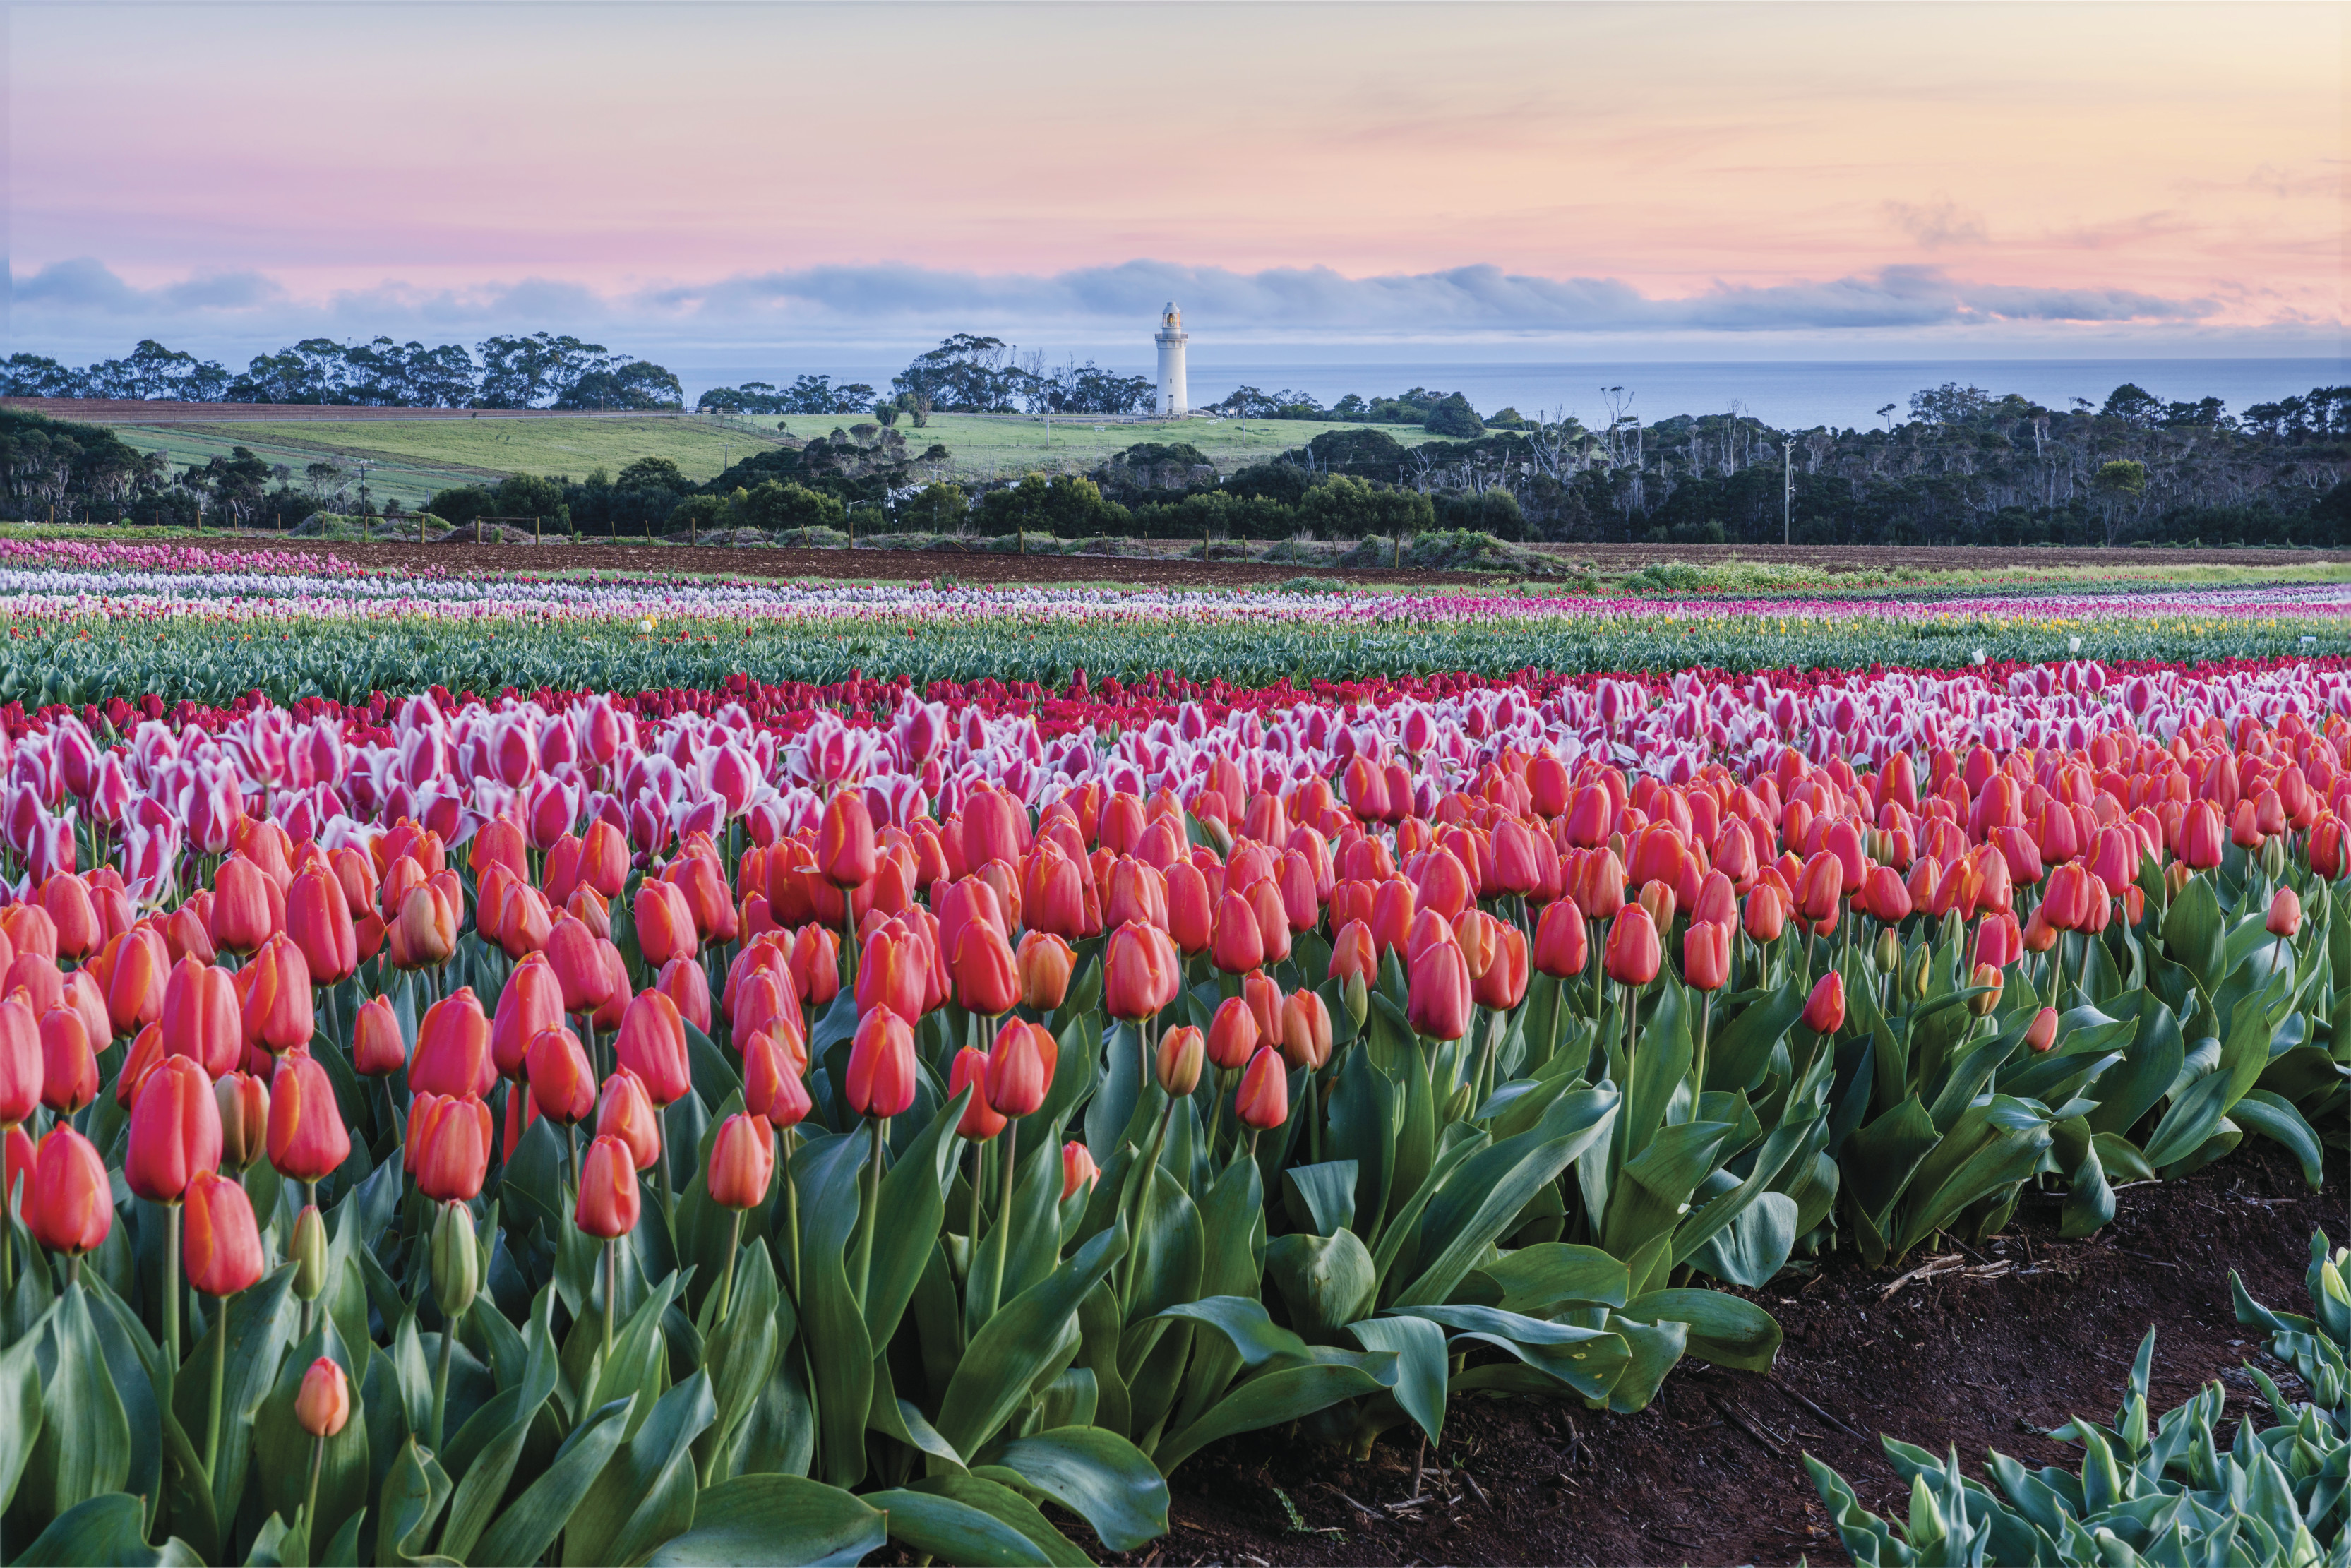 A stunning image of rows of tulips with a lighthouse in the background of the image, taken near dusk.